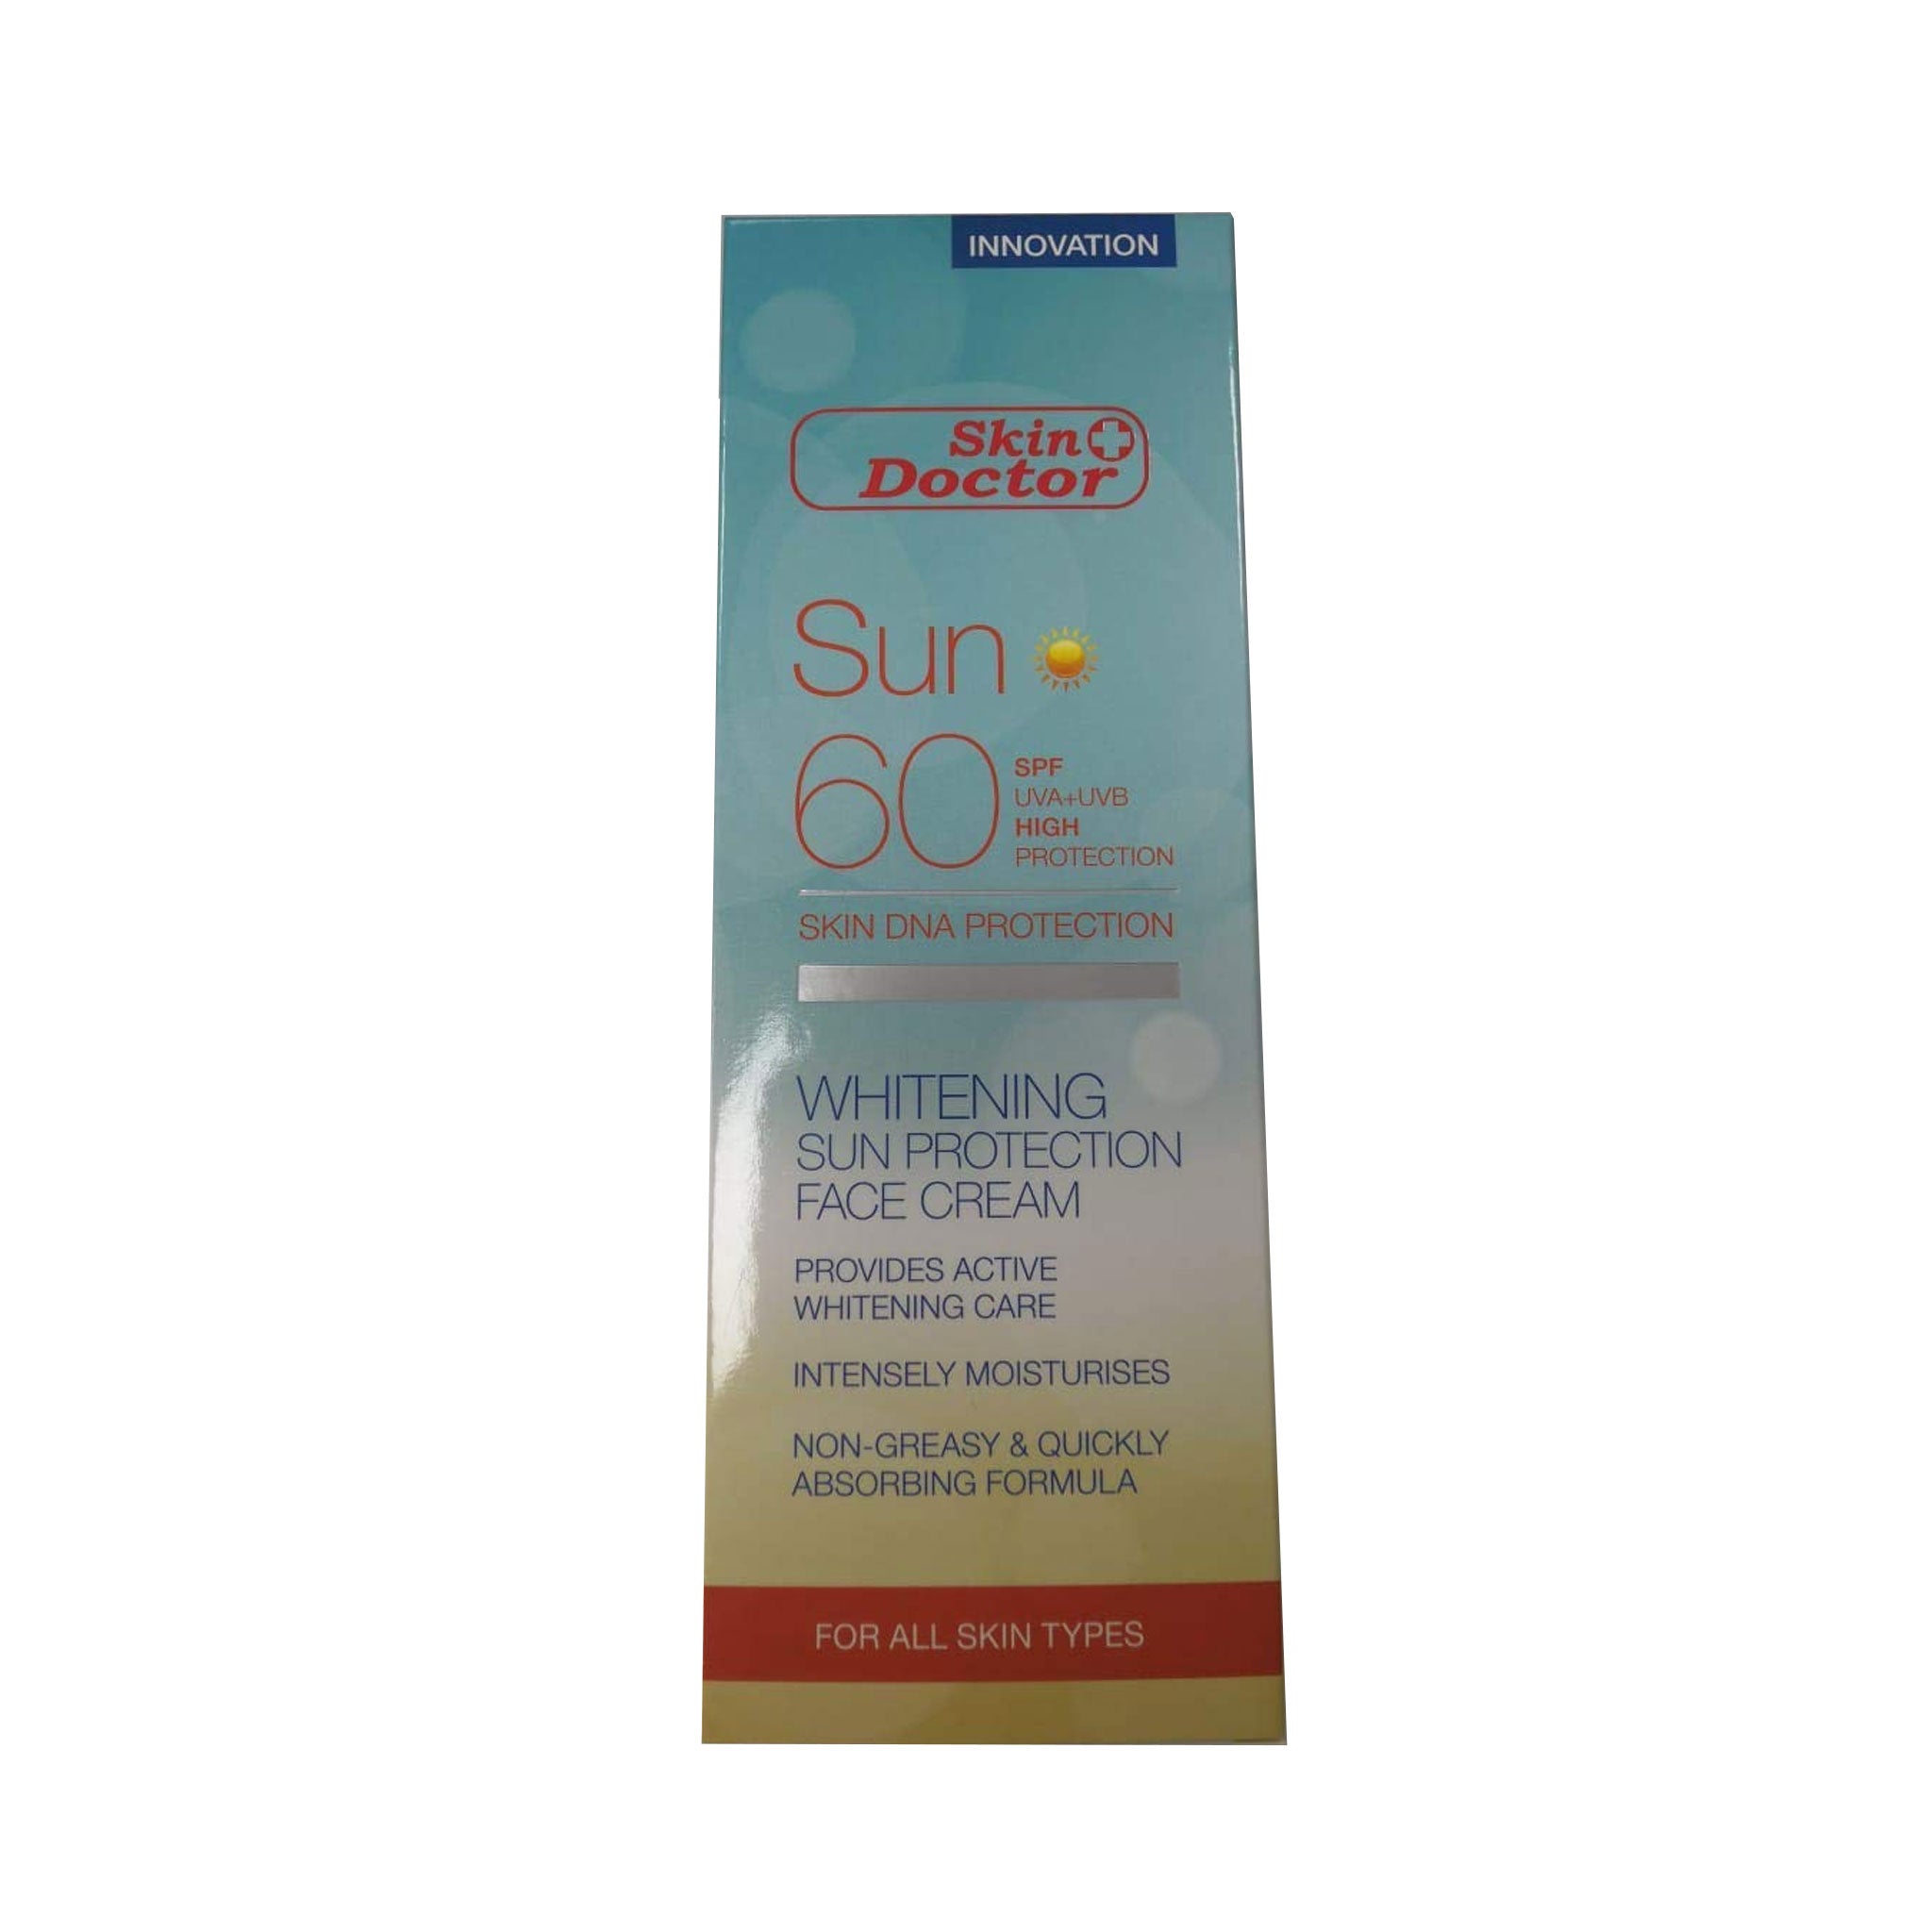 Skin-doctor sunscreen SPF 60 review //IS IT REALLY WORKING?? 